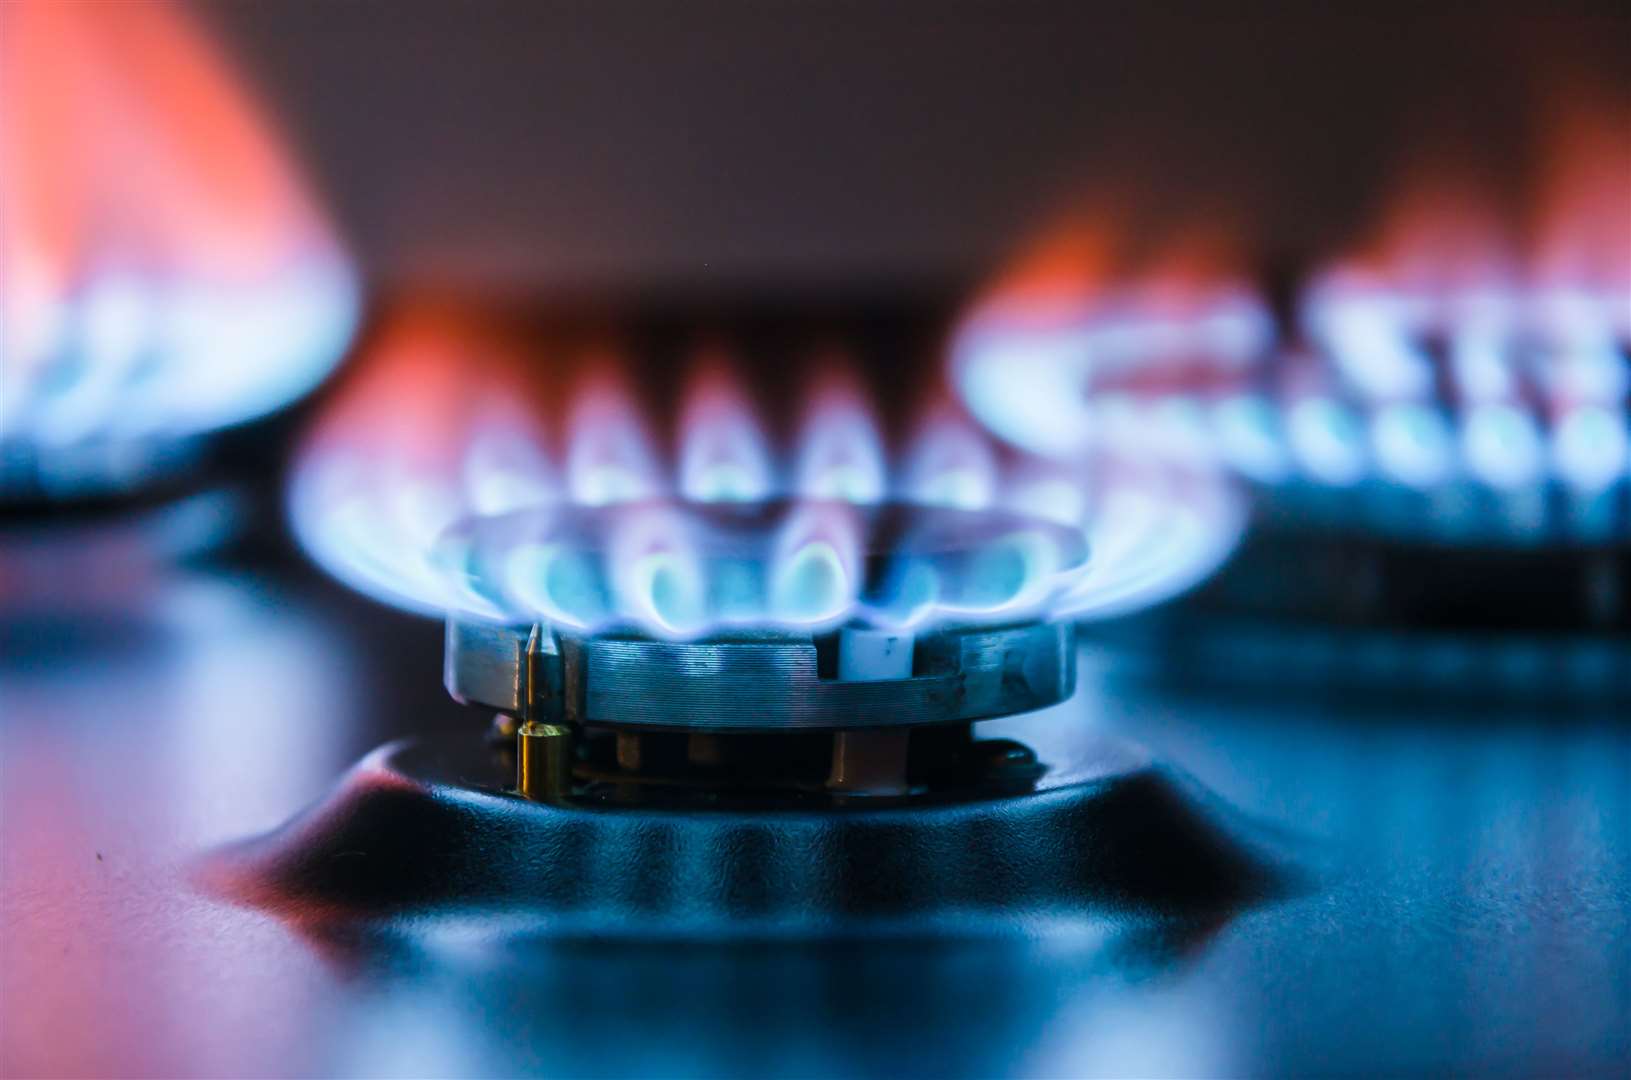 Households are being given an extra £400 to pay energy bills between October and March